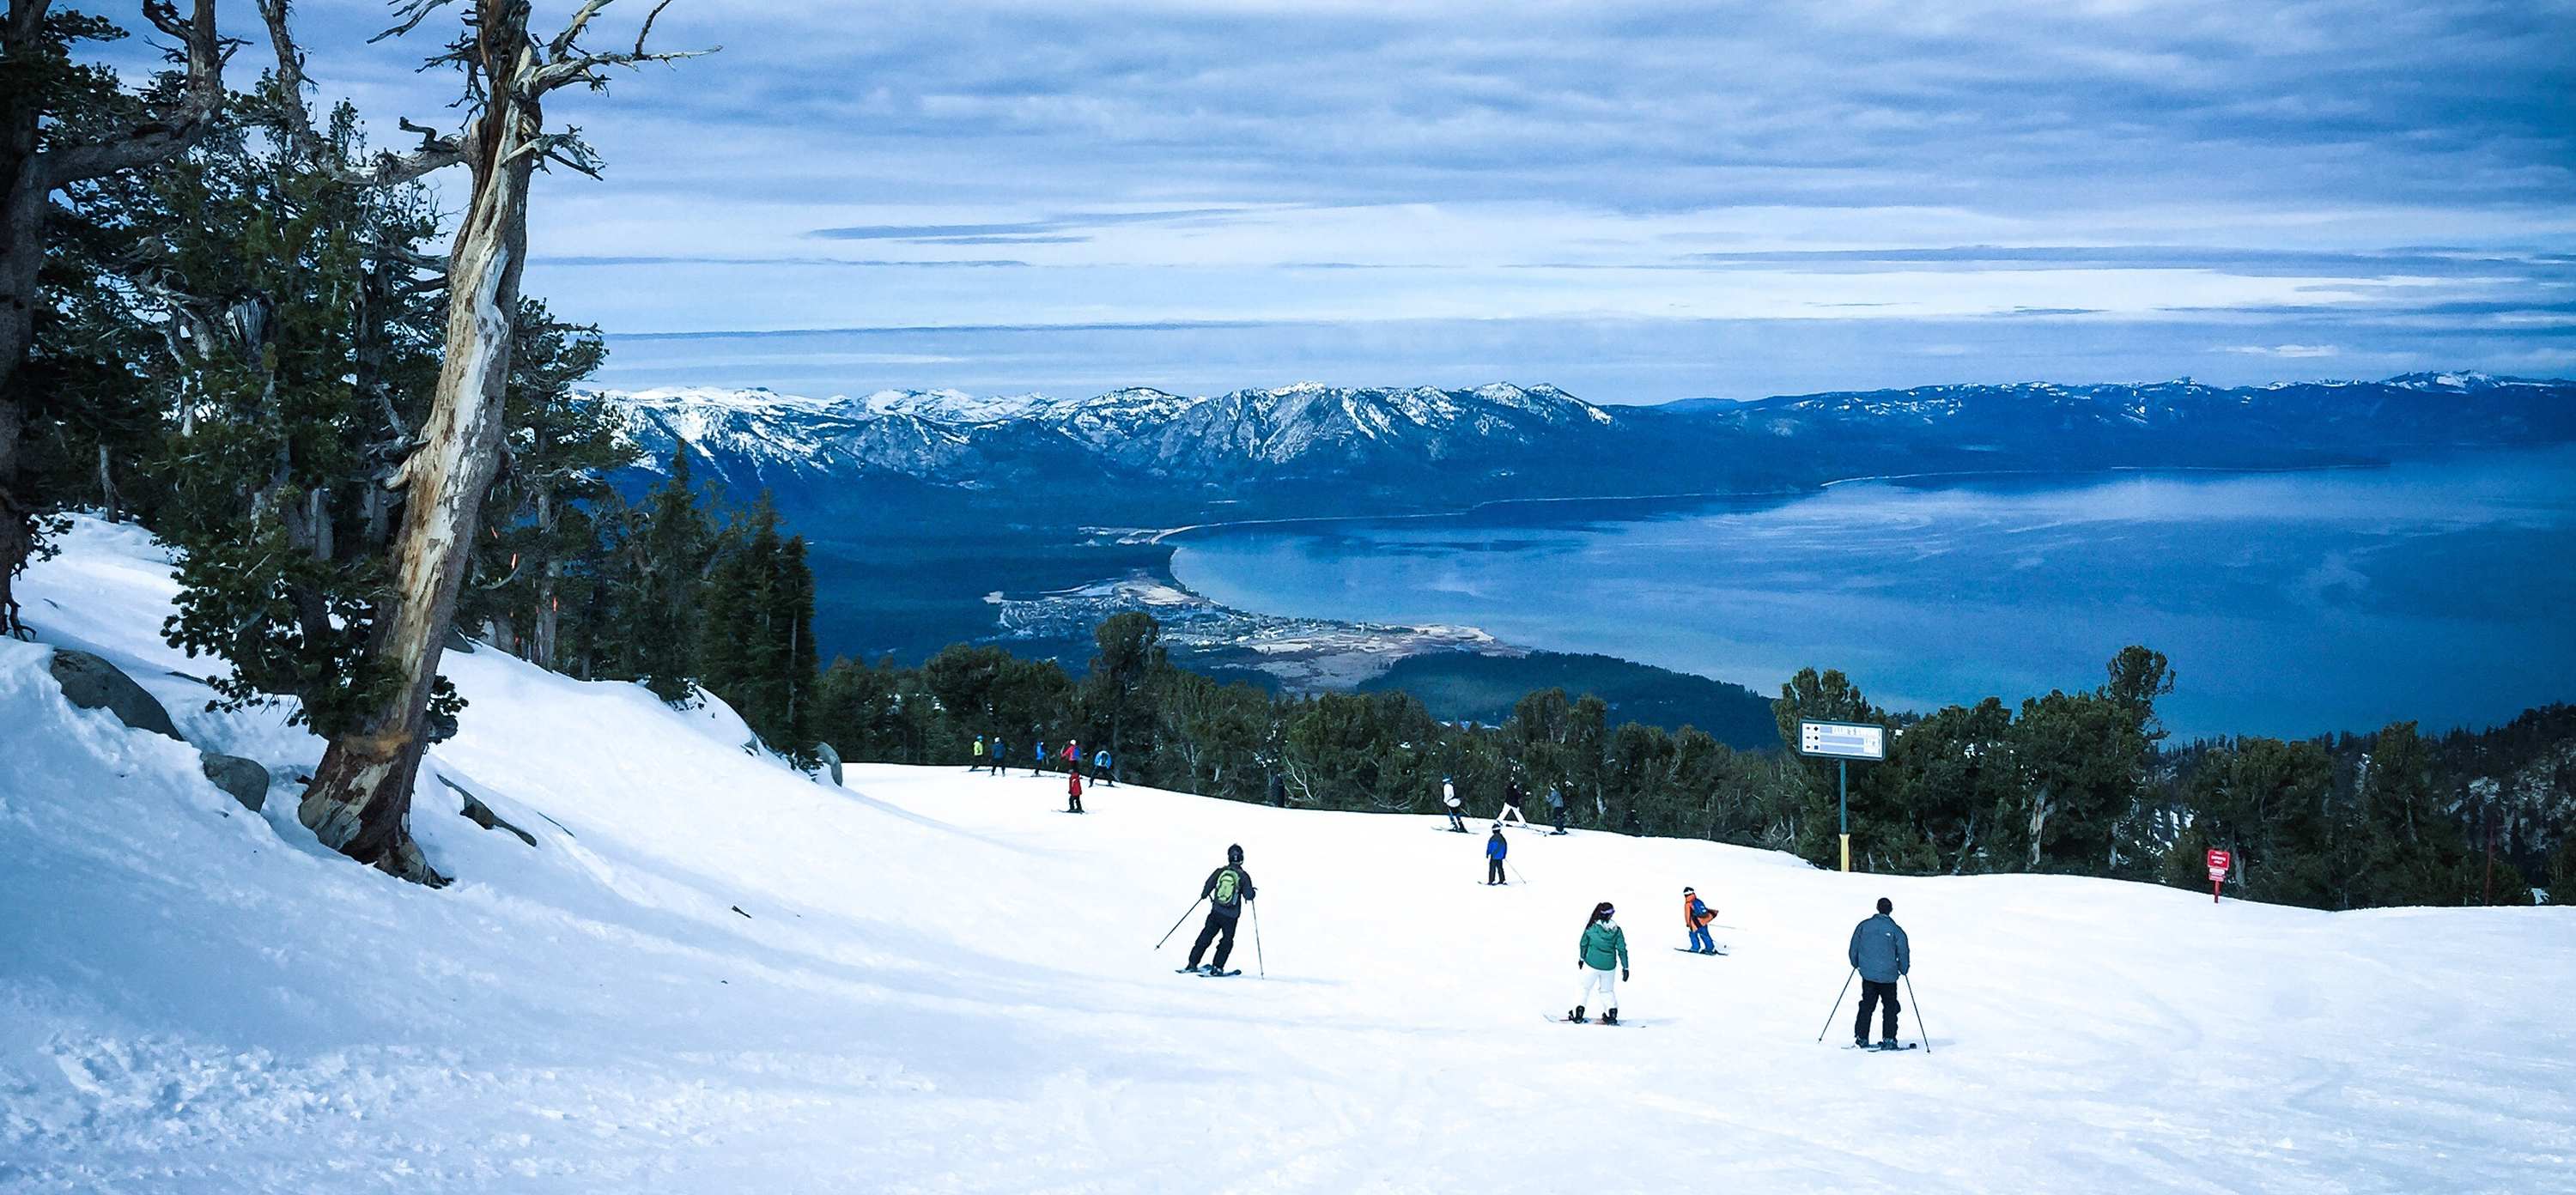 Lake Tahoe In The Winter